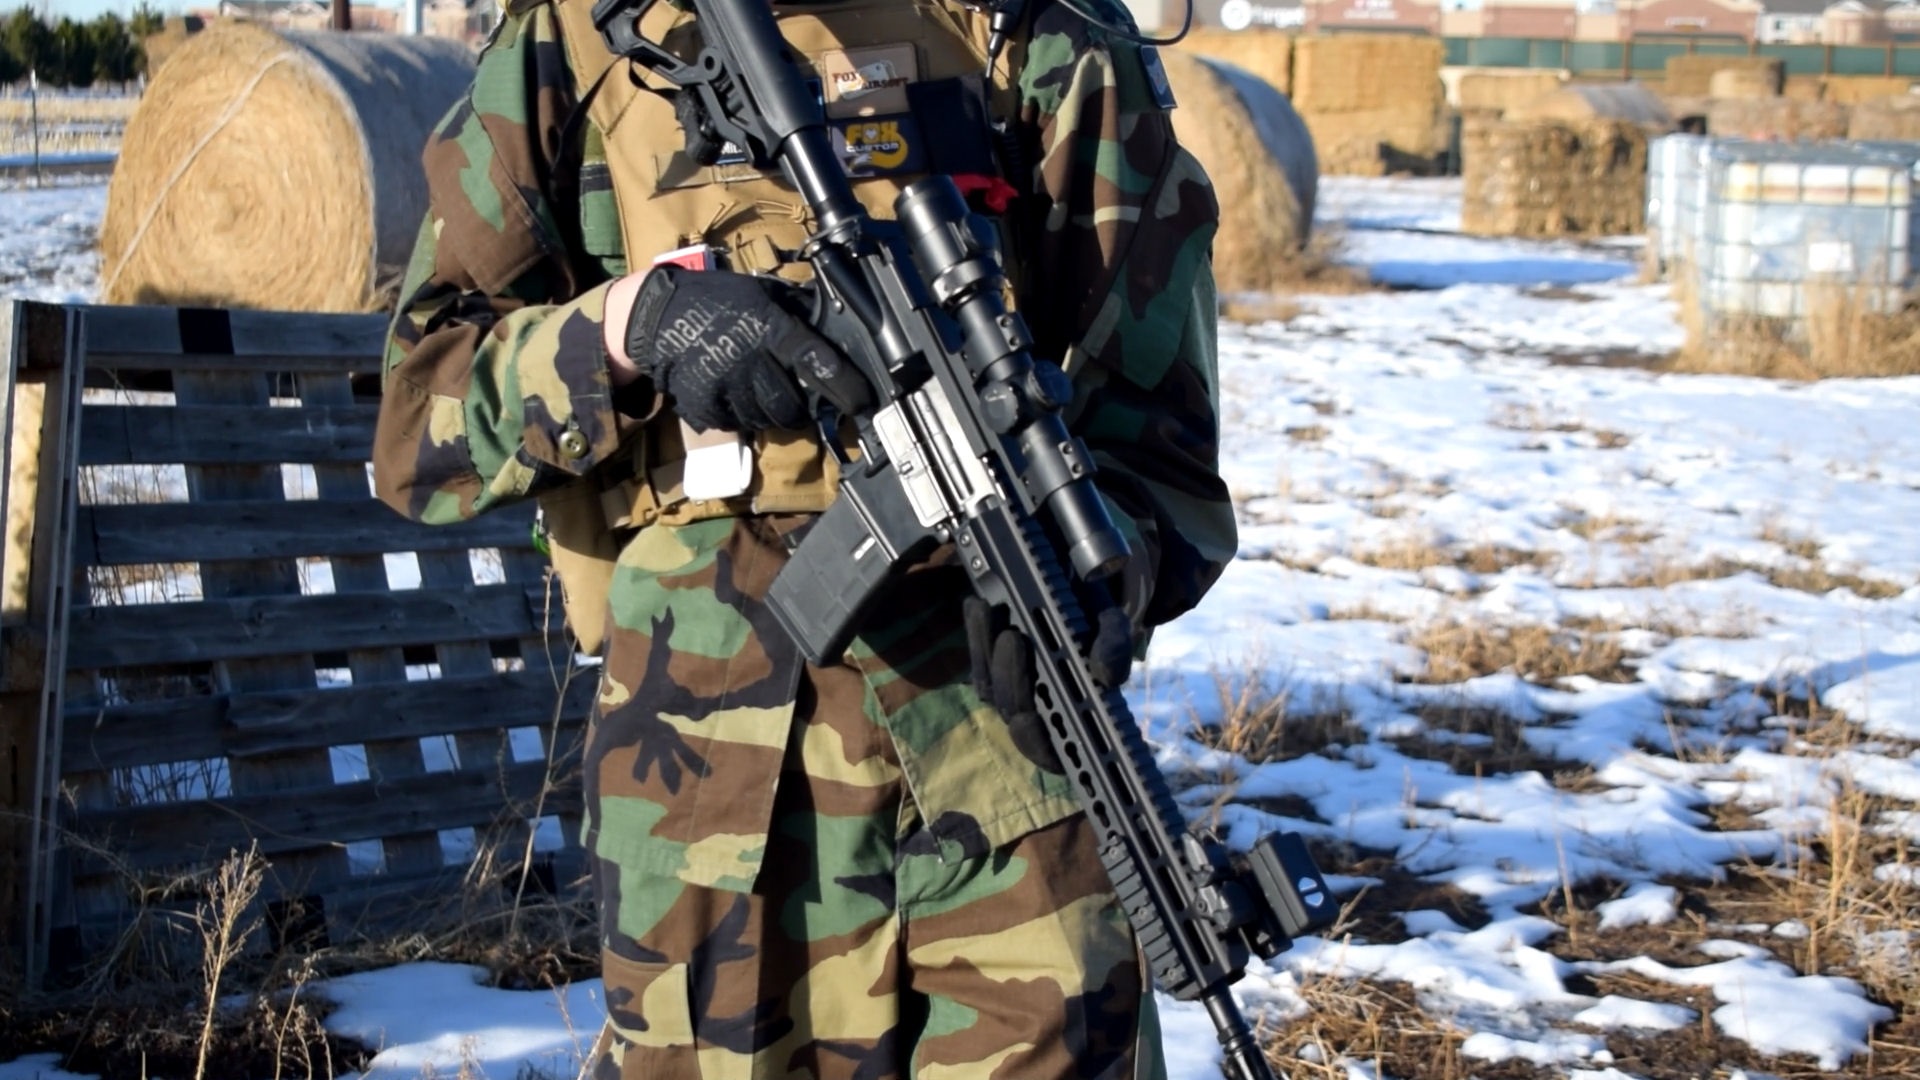 An airsoft player in camouflage uniform holding a rifle with optical sight, standing in a field with hay bales and patches of snow in the background.